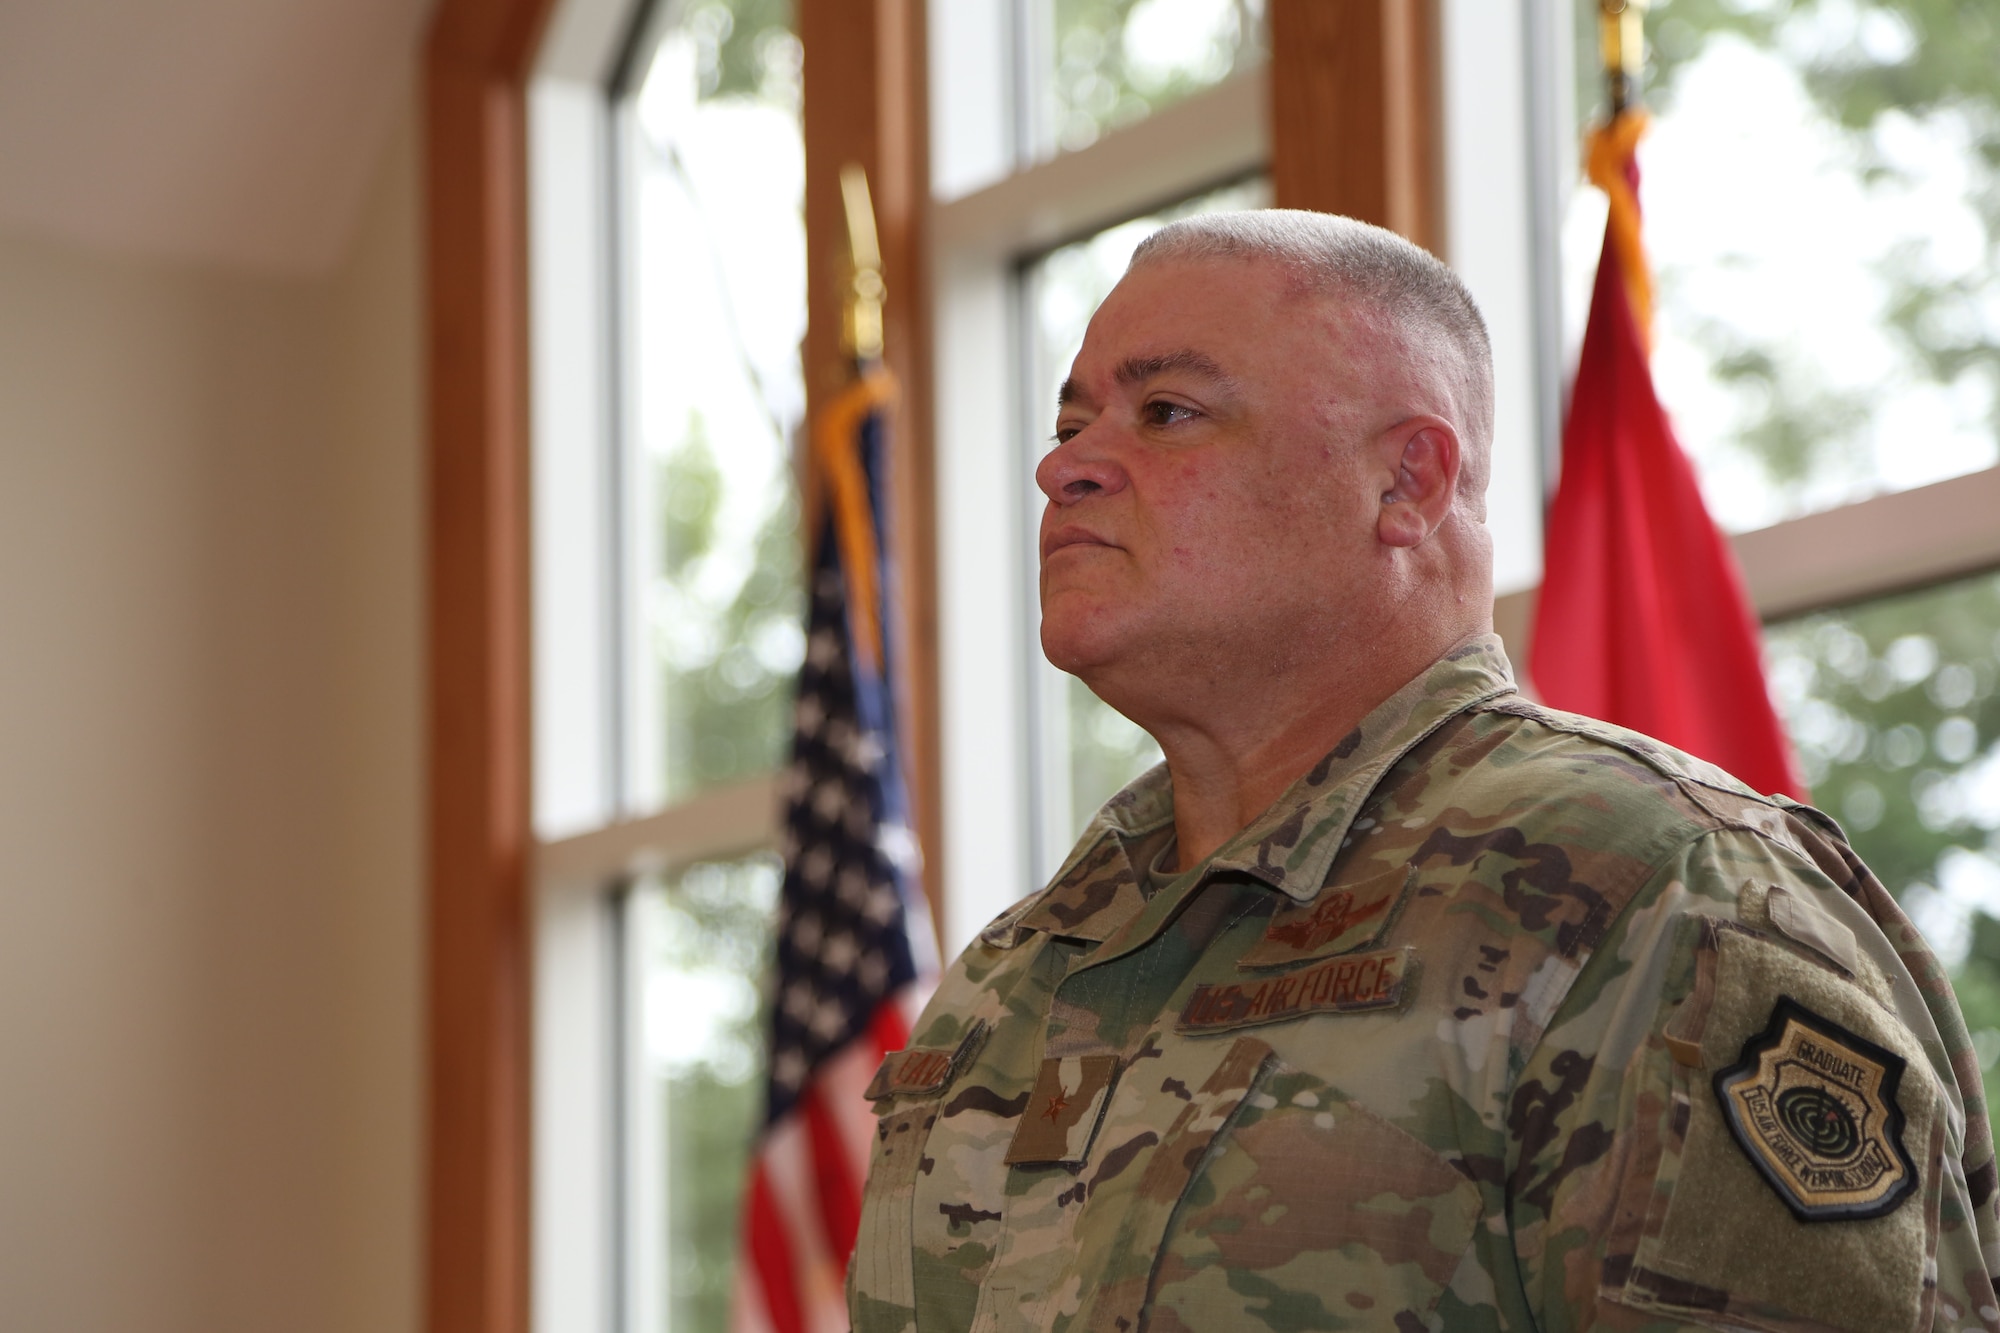 A promotion and assumption of duty ceremony was held for Brig. Gen. Kenneth S. Eaves at the Ike Skelton Training Site in Jefferson City, Mo. on July 15, 2020. Eaves is the Assistant Adjutant General for the State of Missouri, and commands the state's more than 2,300 Airmen. (U.S. National Guard photo by Spc. Christopher Saunders)